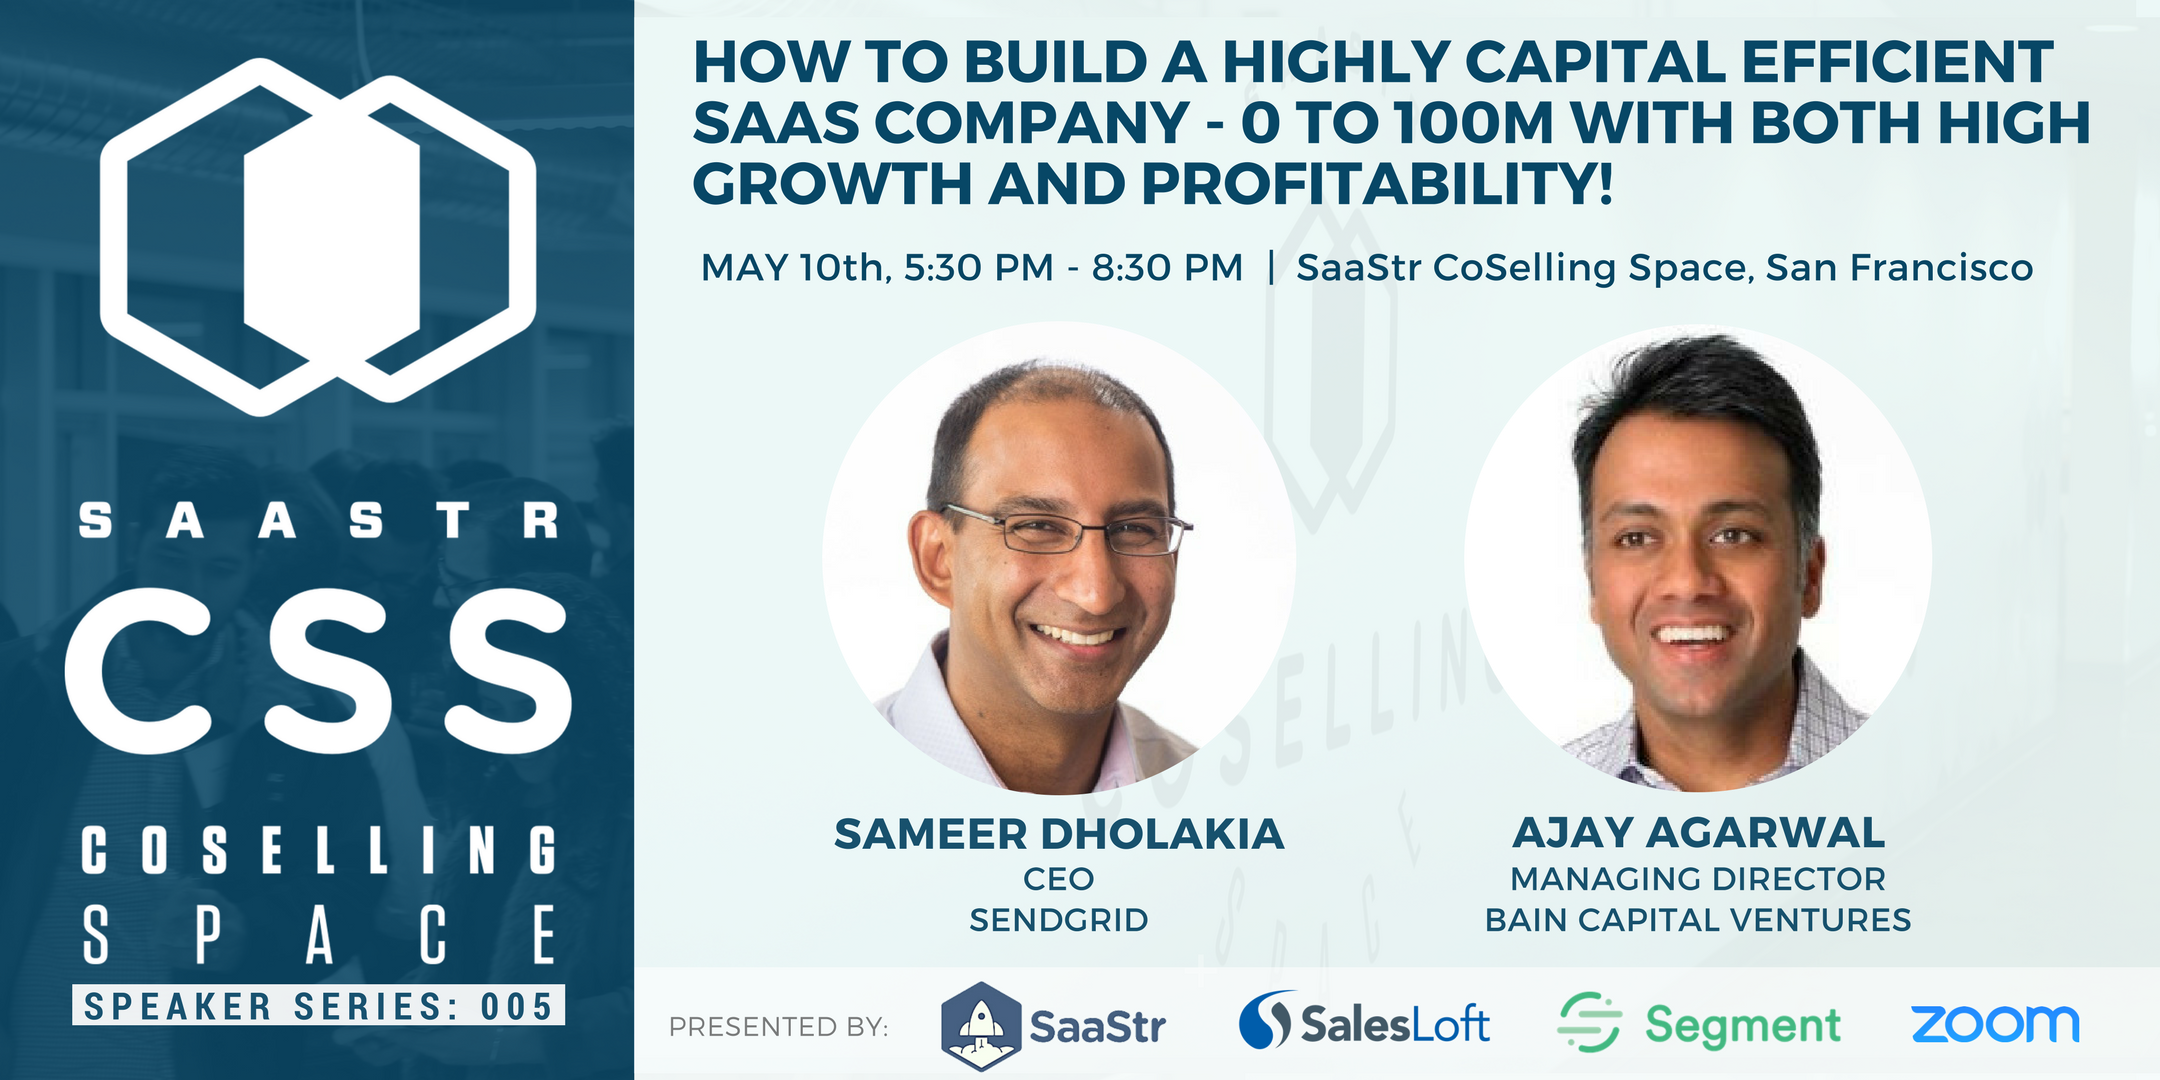 How to Build a Highly Capital Efficient SaaS Company with Sameer Dholakia, CEO, SendGrid, and Ajay Agarwal, Managing Director, Bain Capital Ventures as the SaaStr CoSelling Space in San Francisco. May 10, 2017. 